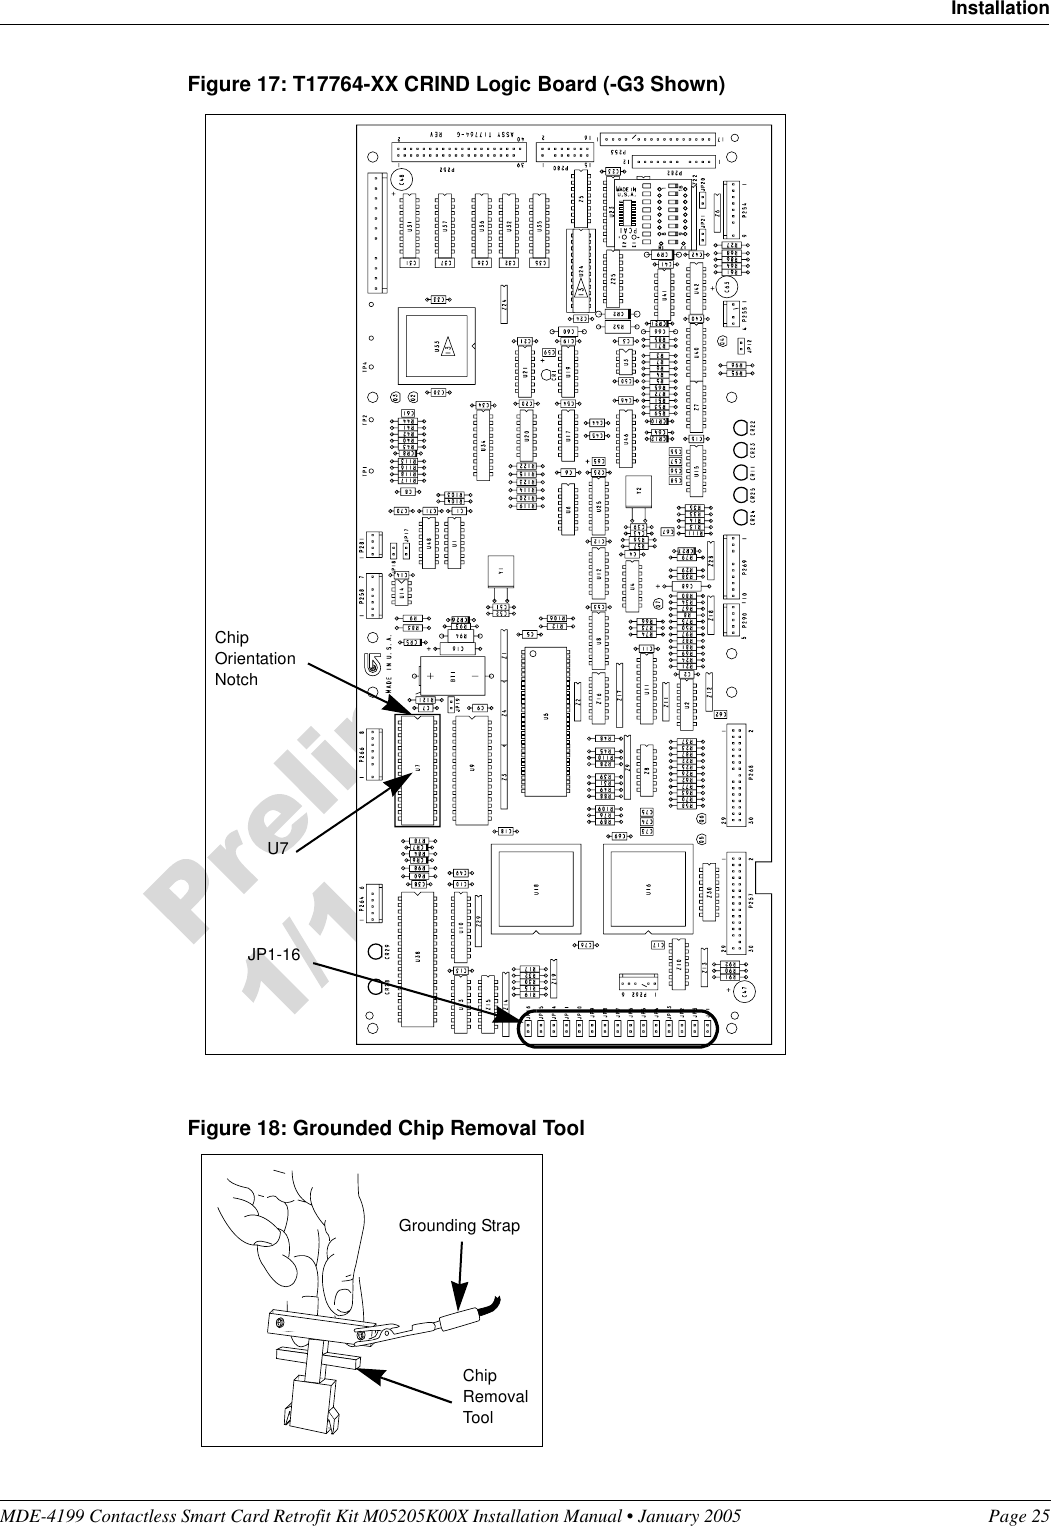 MDE-4199 Contactless Smart Card Retrofit Kit M05205K00X Installation Manual • January 2005 Page 25InstallationFigure 17: T17764-XX CRIND Logic Board (-G3 Shown)Figure 18: Grounded Chip Removal ToolU7 Chip Orientation NotchJP1-16Chip Removal ToolGrounding Strap